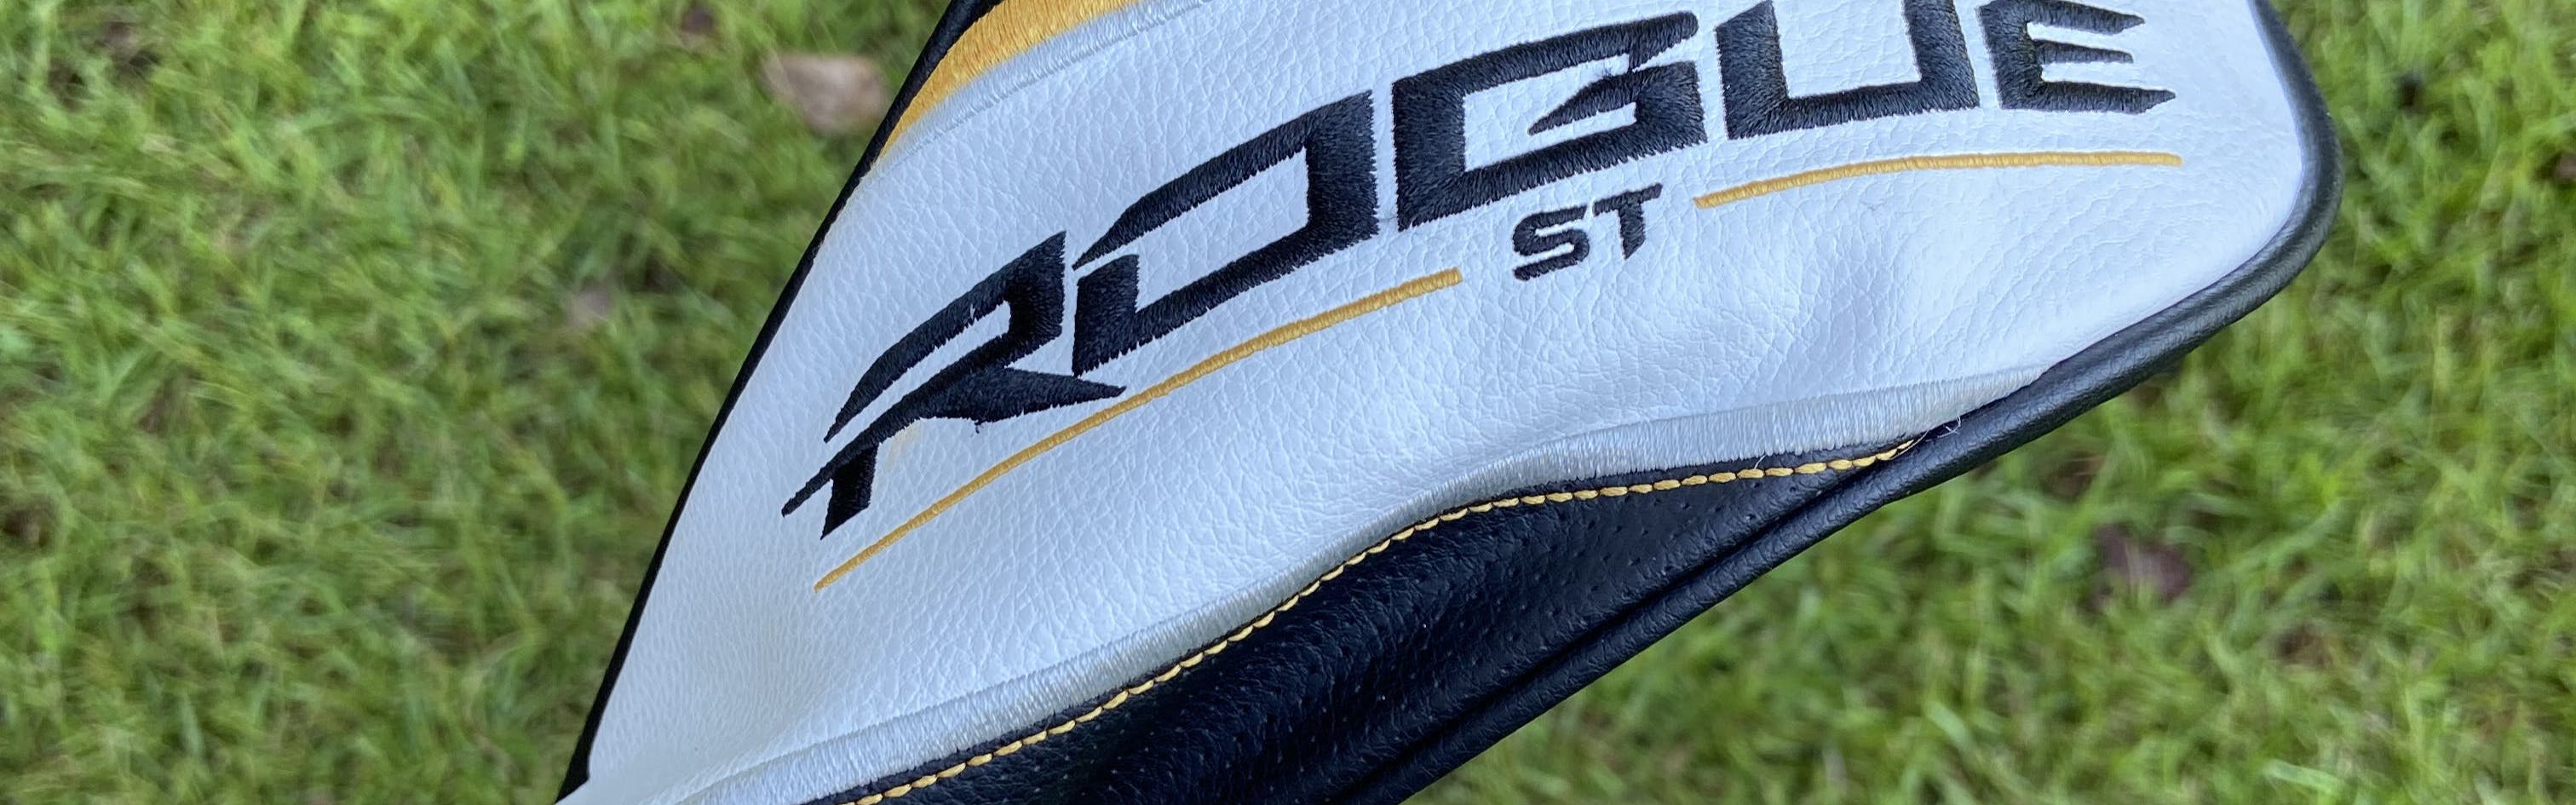 Head cover on the Callaway Rogue ST Max Fairway Wood.